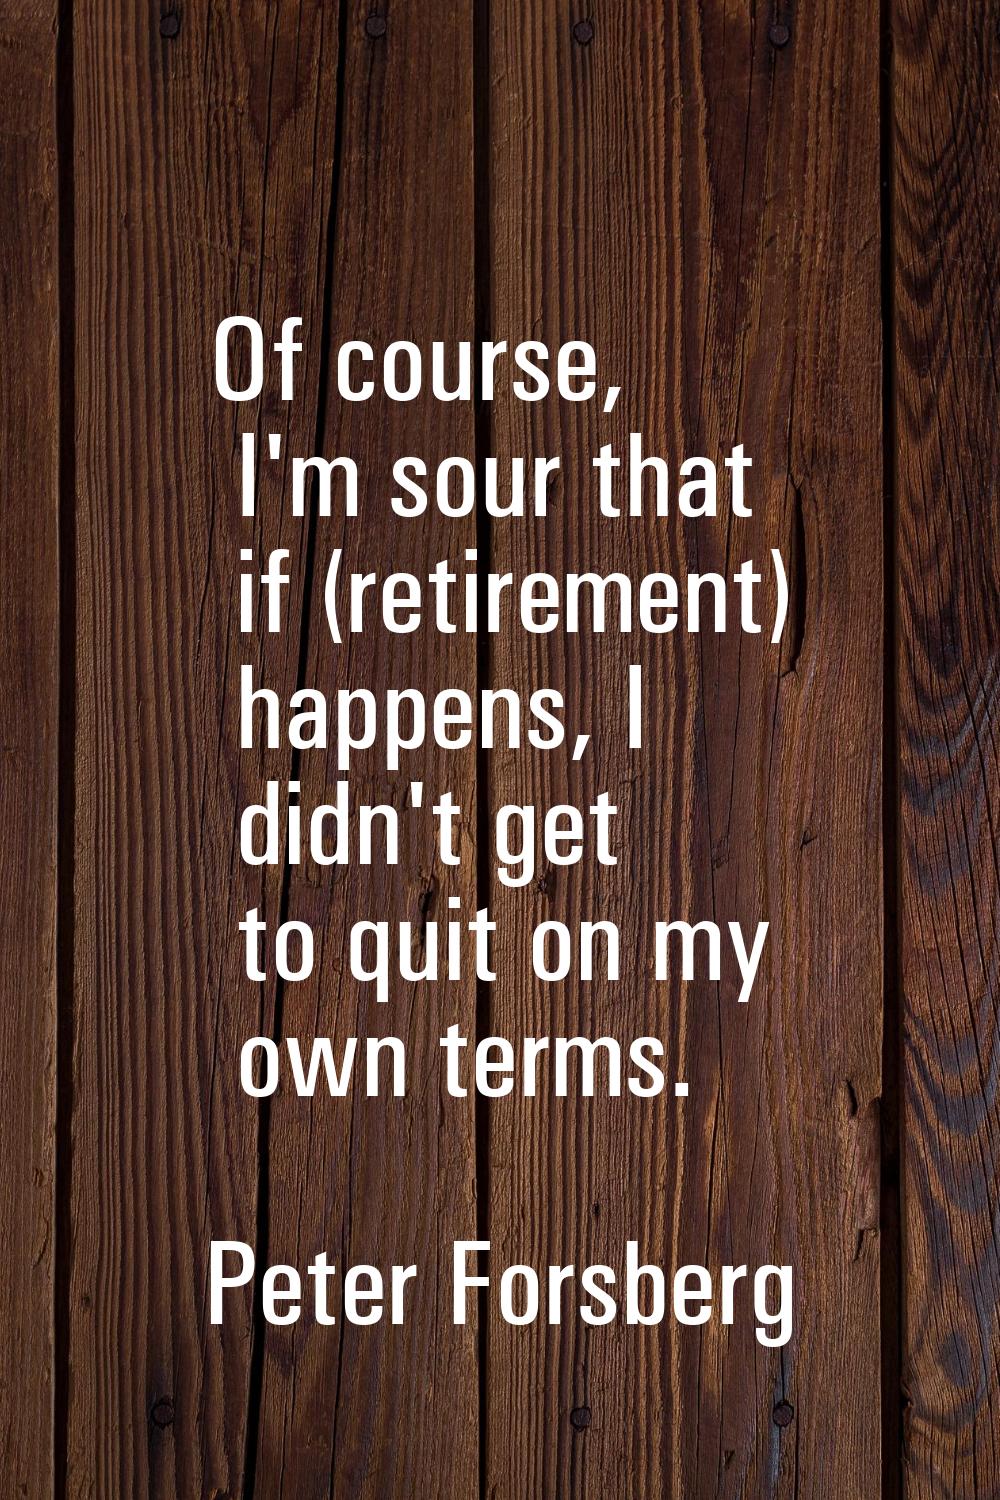 Of course, I'm sour that if (retirement) happens, I didn't get to quit on my own terms.